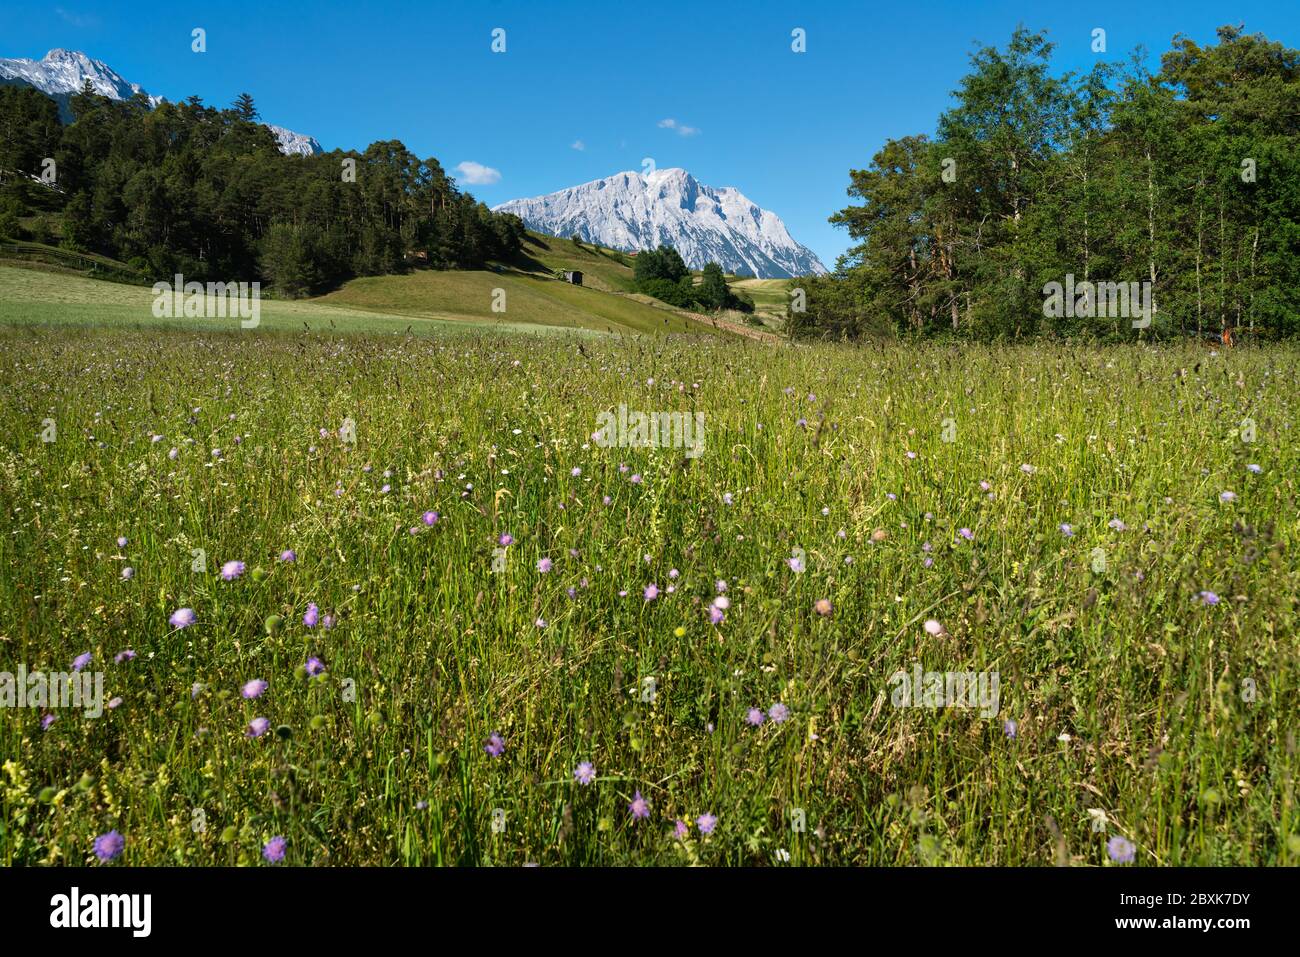 Austrian summer countryside with green flower meadow, evergreen forest and rocky mountains, Mieminger Plateau, Tyrol, Austria Stock Photo